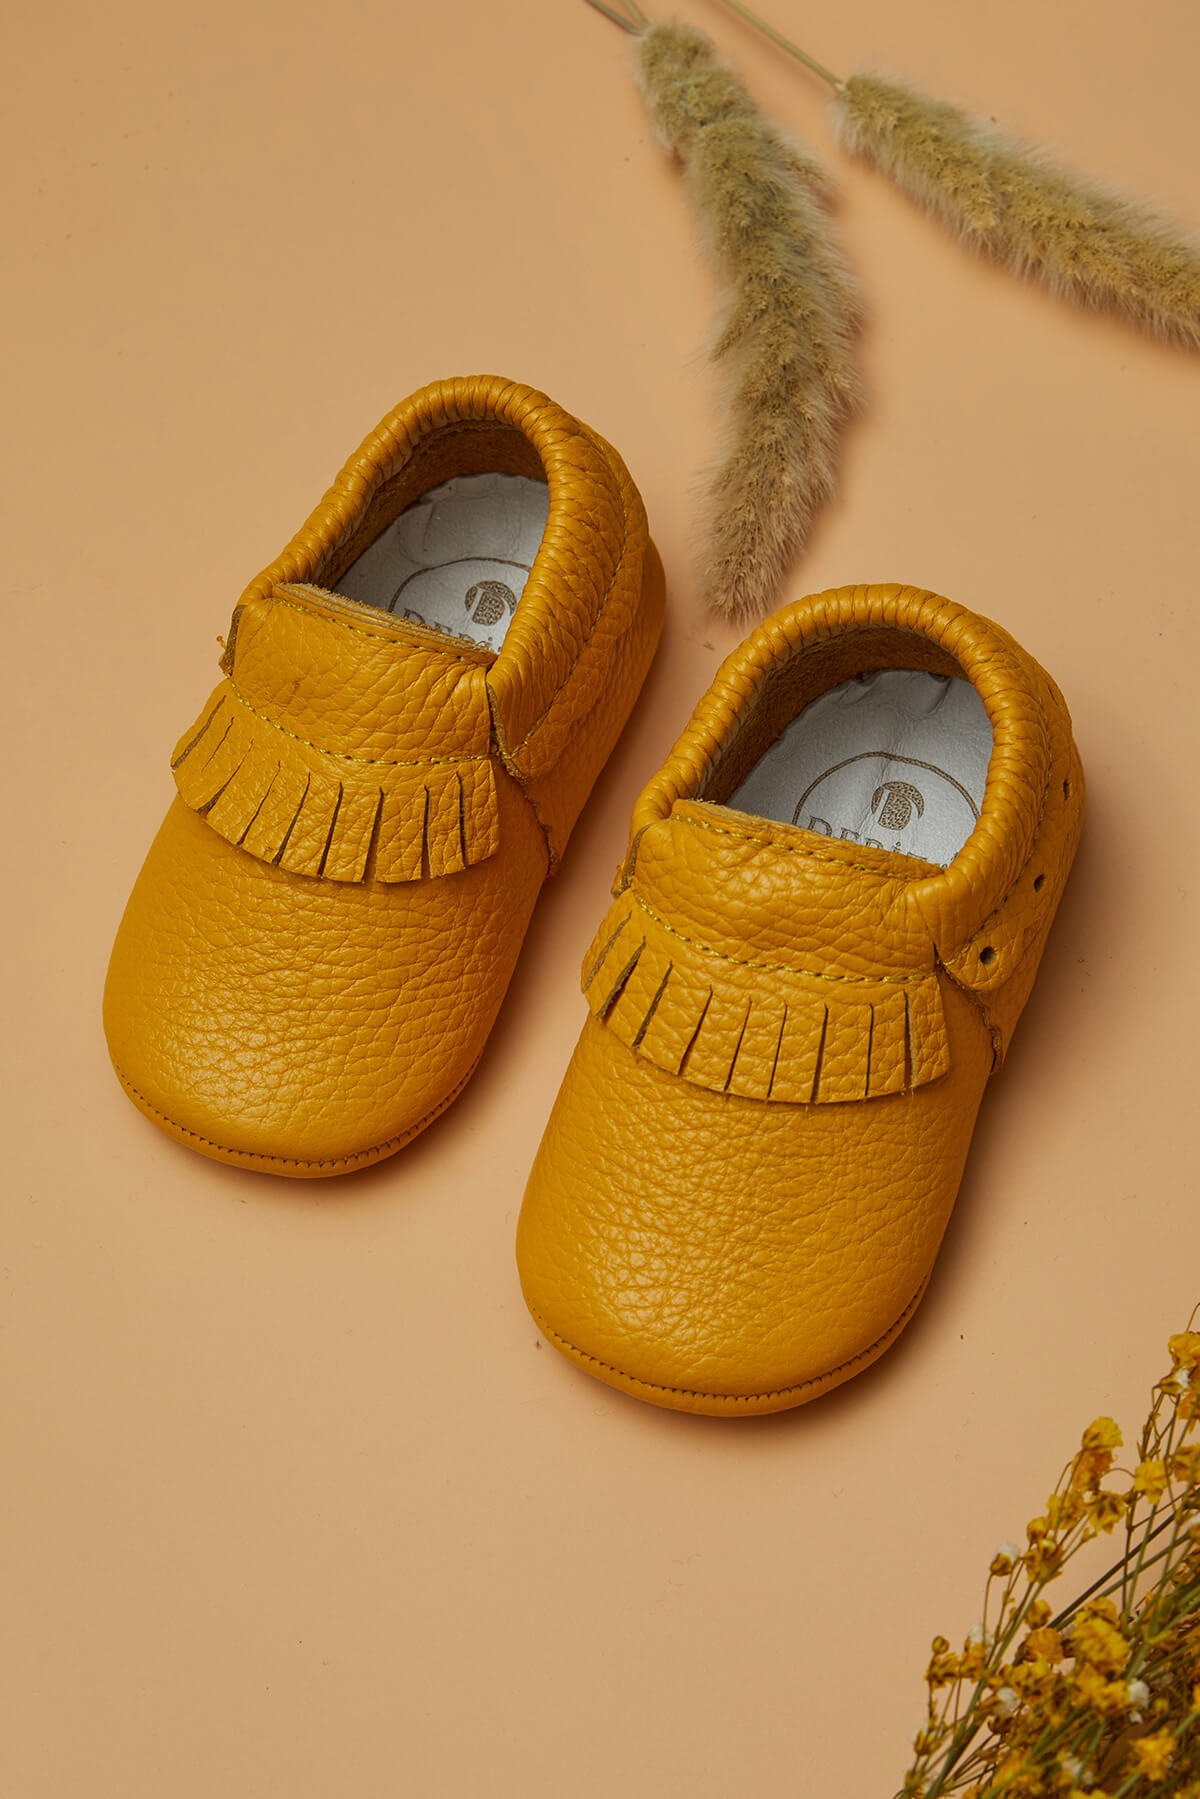 Genuine Leather Elasticated Baby Shoes Mustard